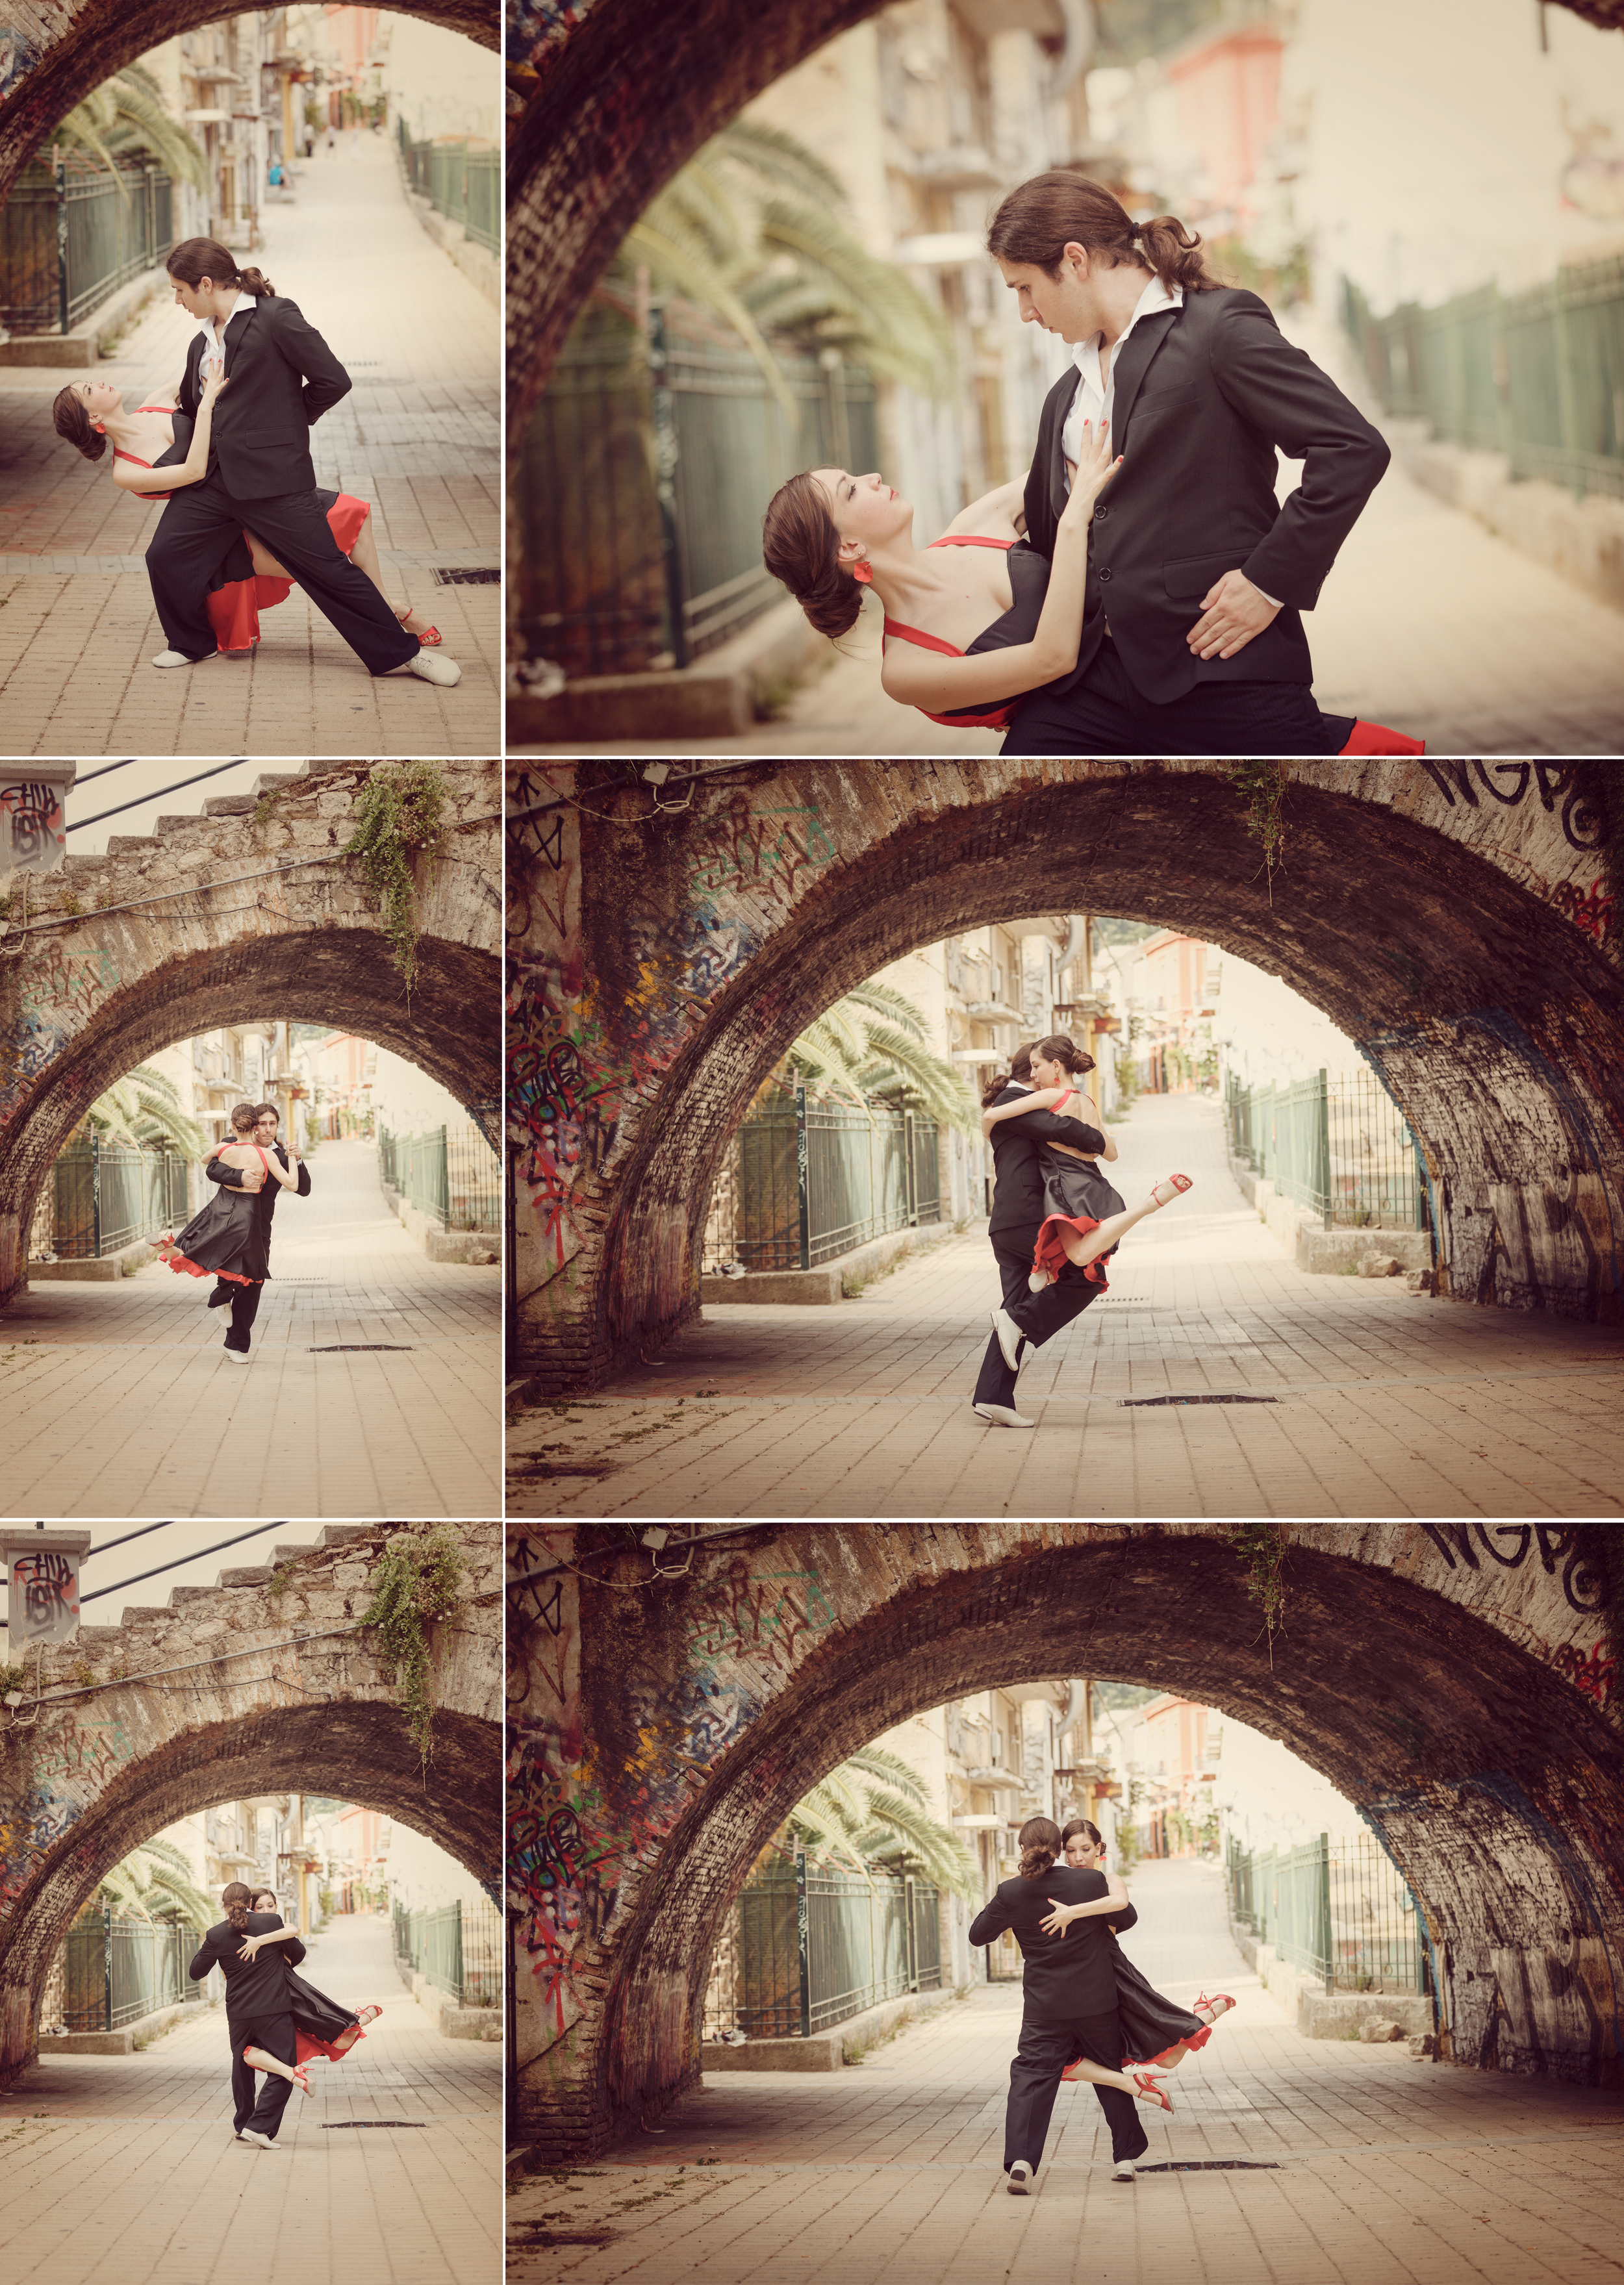 ANDRIOPOULOS_PHOTOGRAPHY TANGO 5.jpg